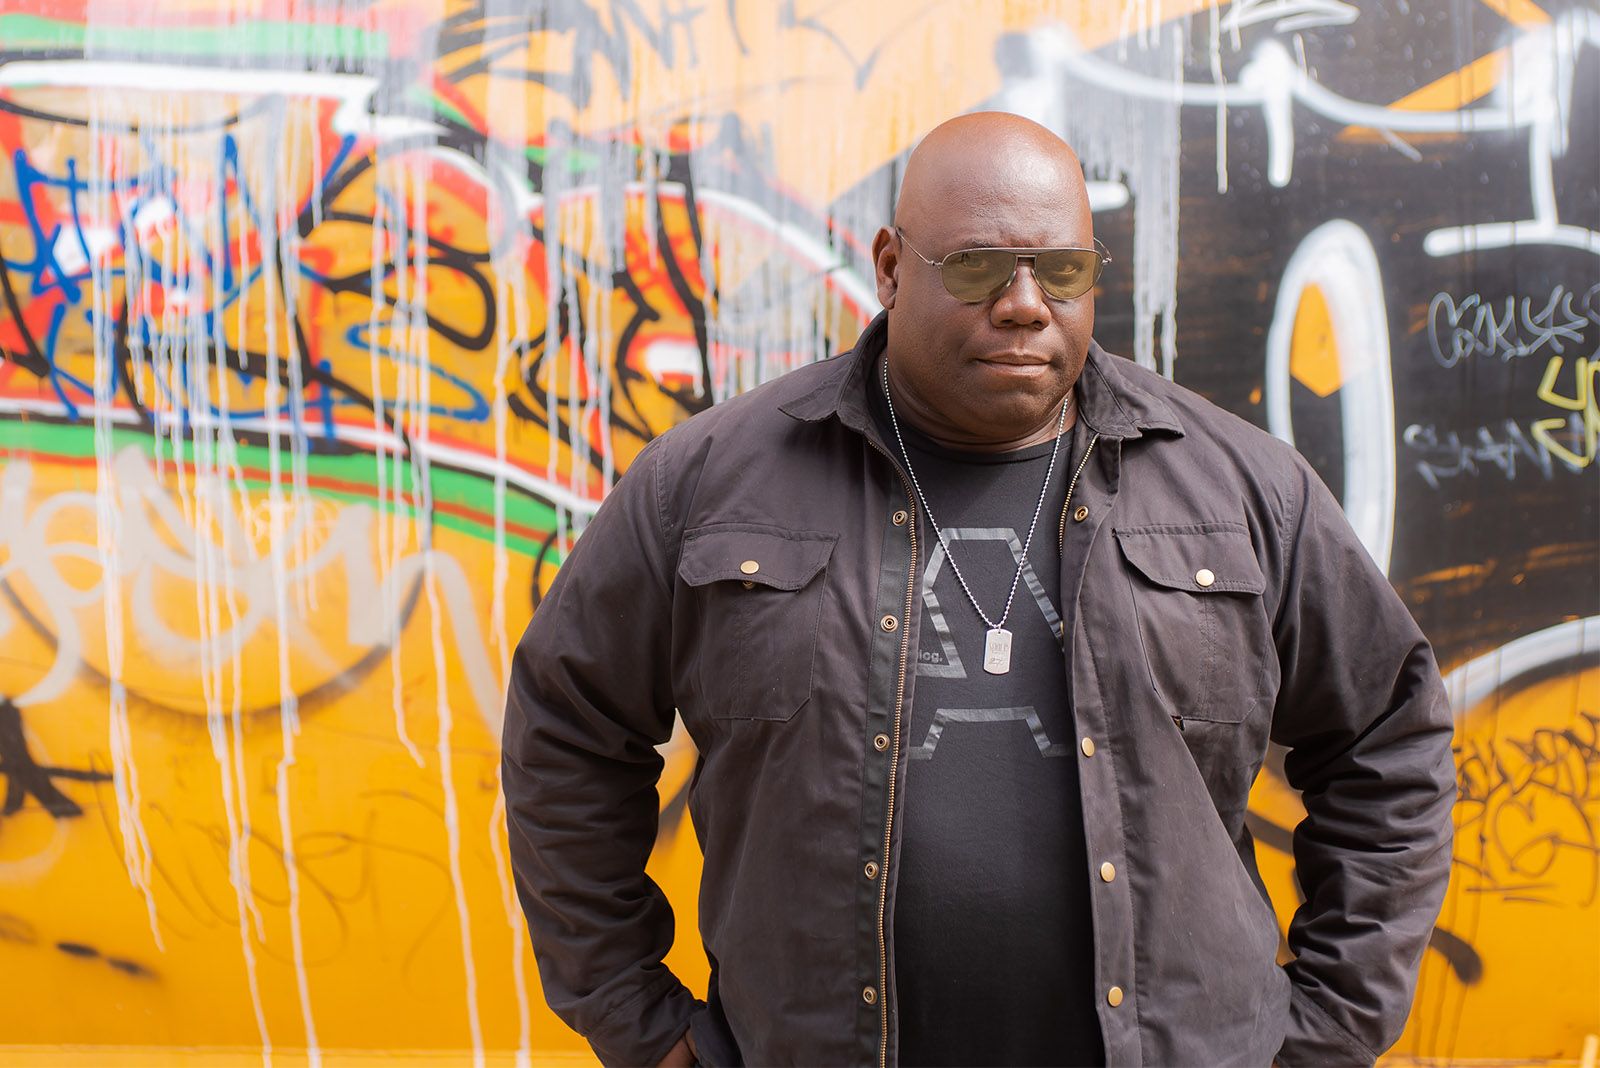 How to watch Carl Cox live 29 May 2020 Xiaomi MyHouseParty image 1